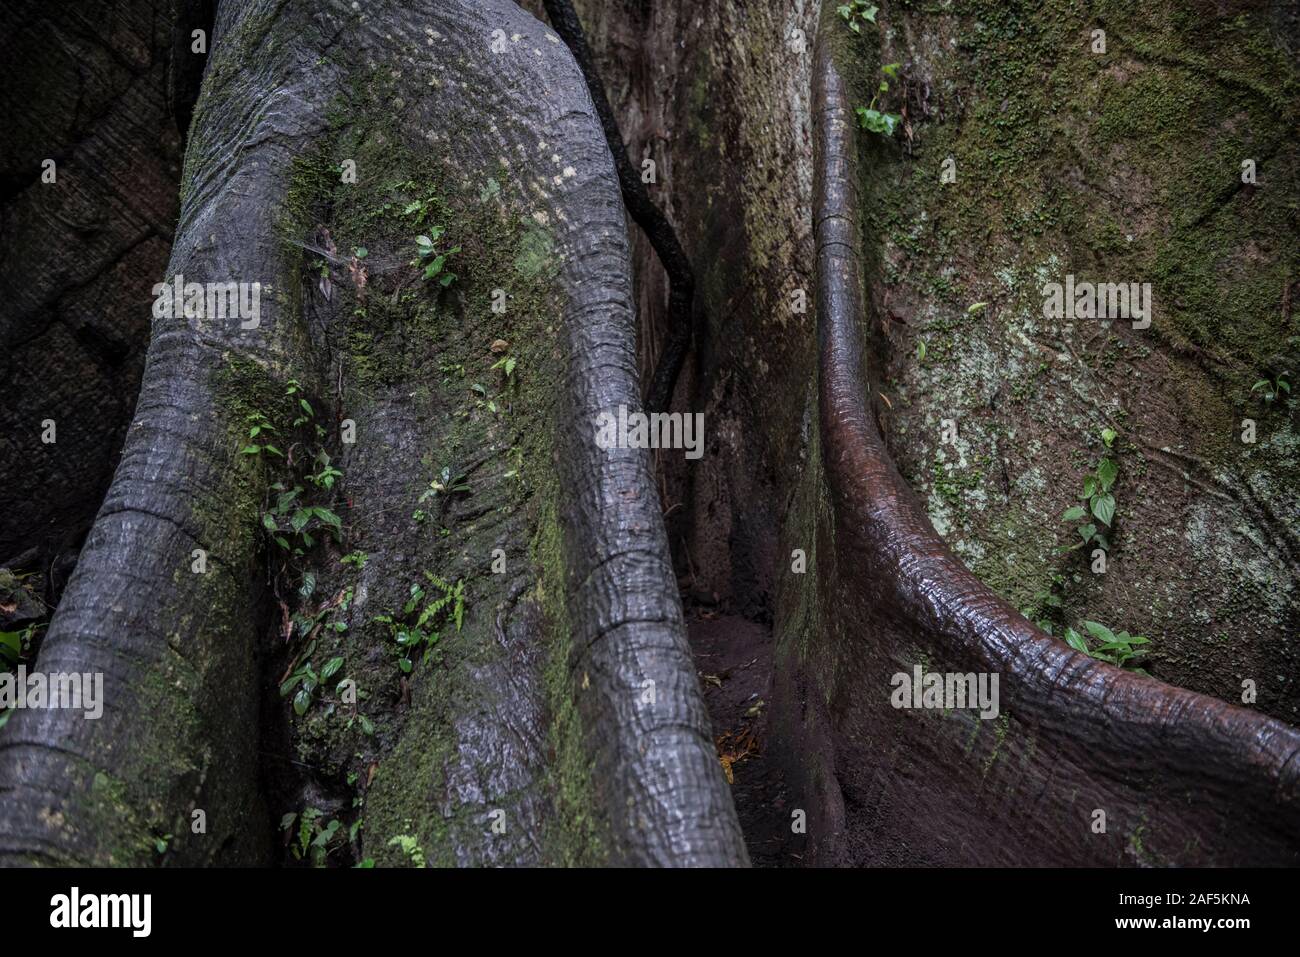 A close up of a large tree in Monteverde Biological Reserve Costa rica Stock Photo